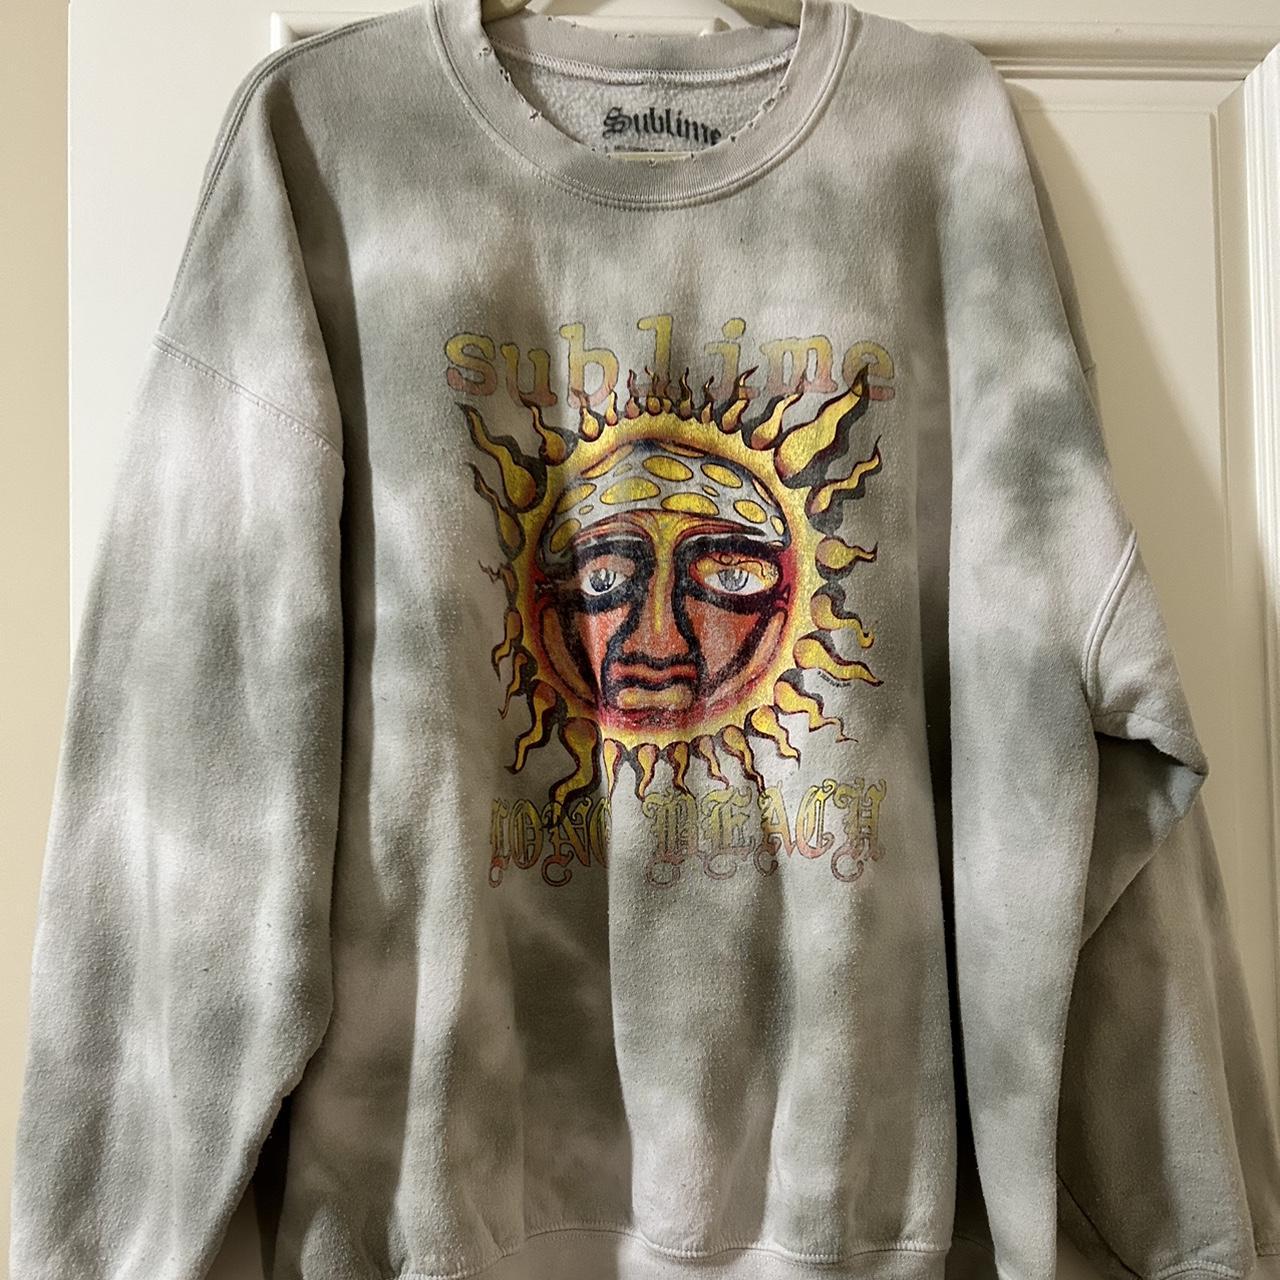 URBAN OUTFITTERS Sublime Tour Tie Dye Hoodie... - Depop